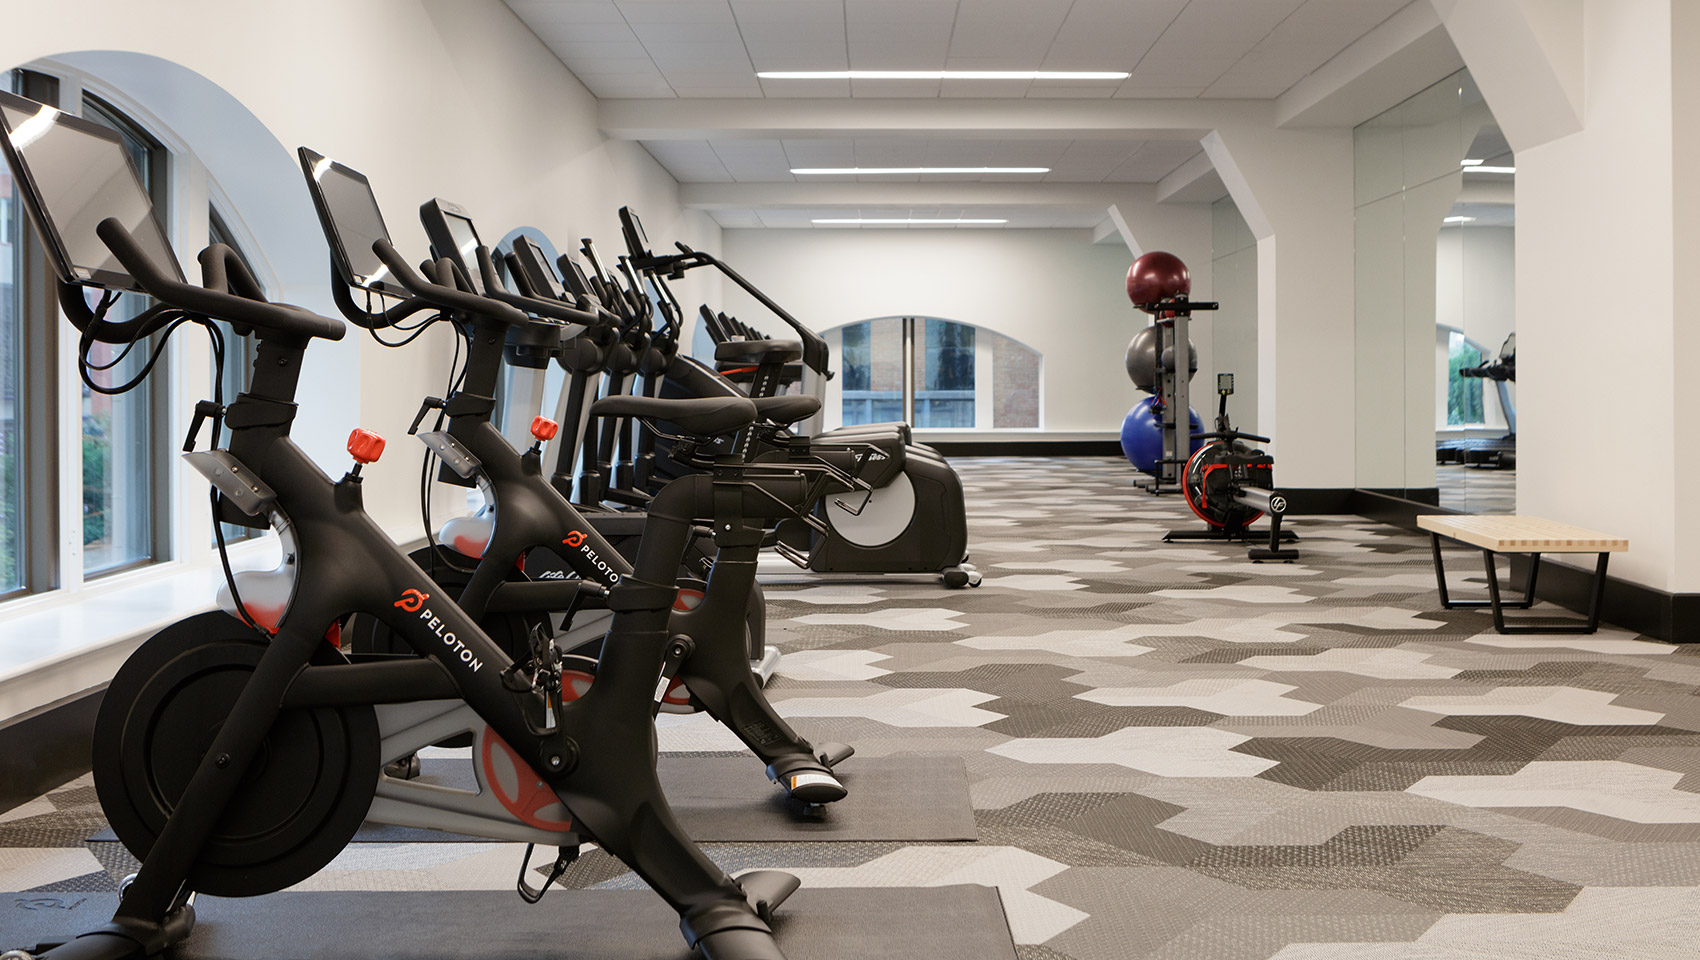 Onsite gym features top of the line fitness equipment like Peloton bikes and a rowing machine